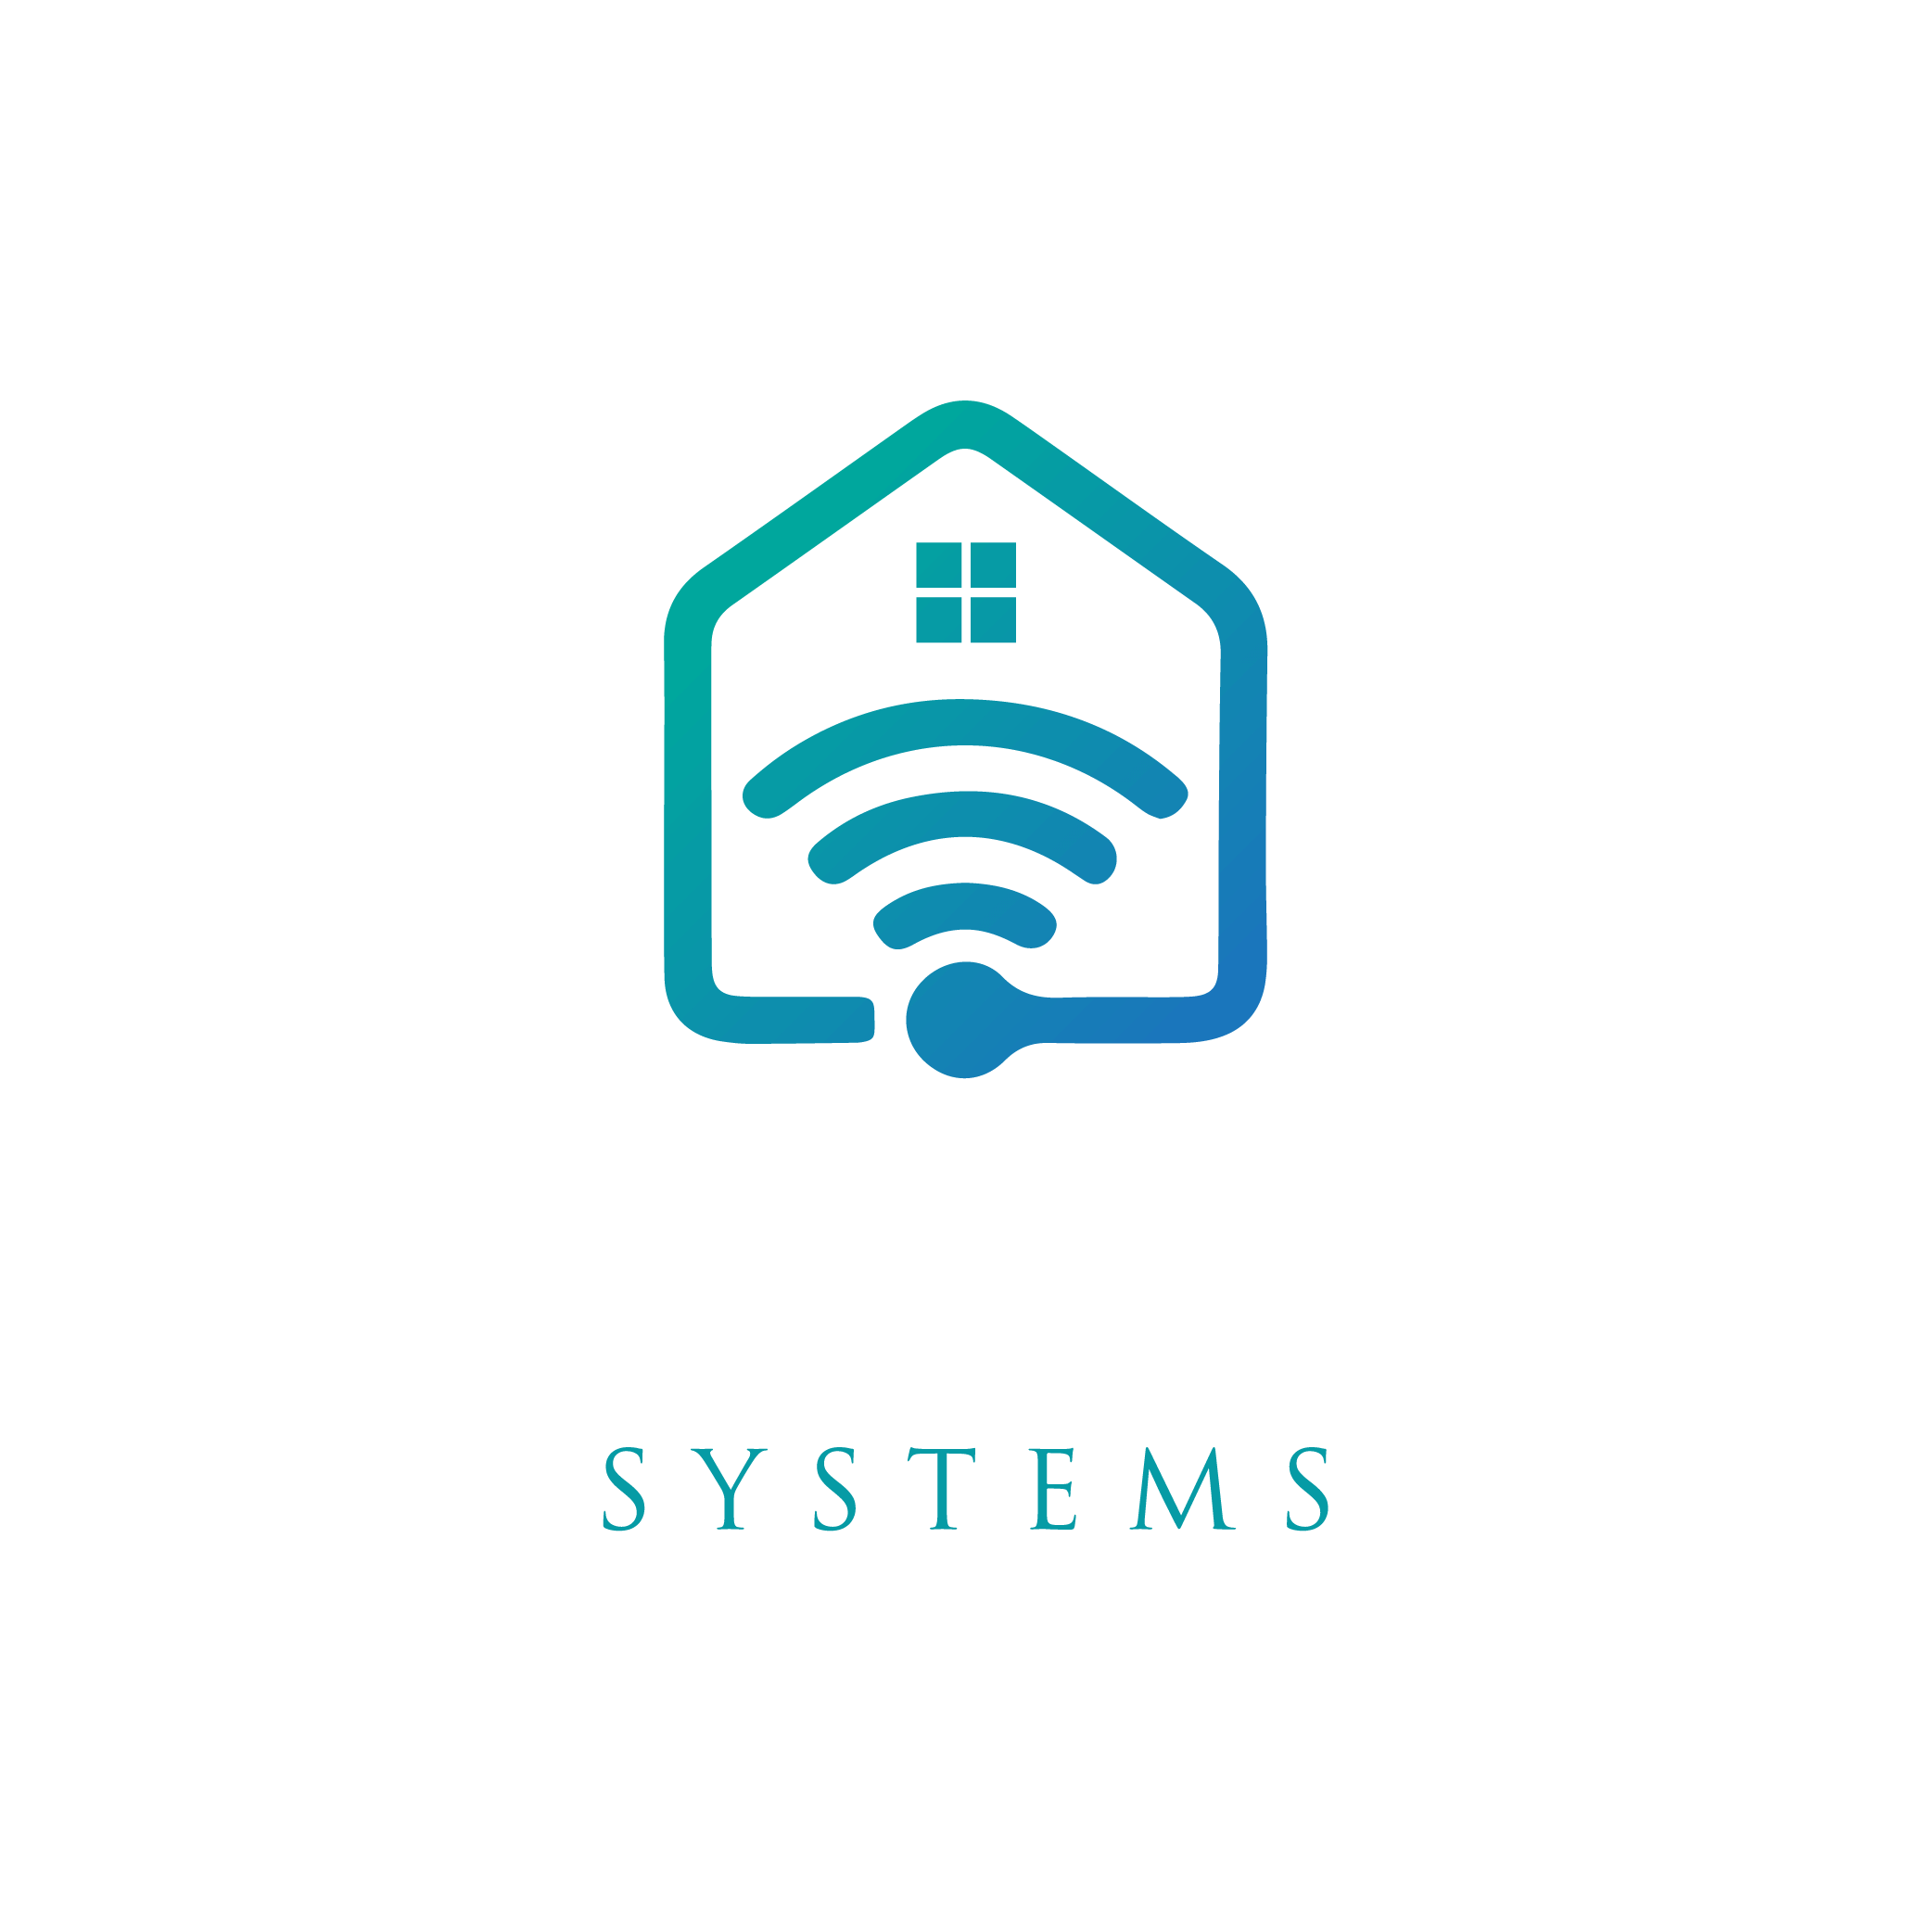 Step-A-Side Systems